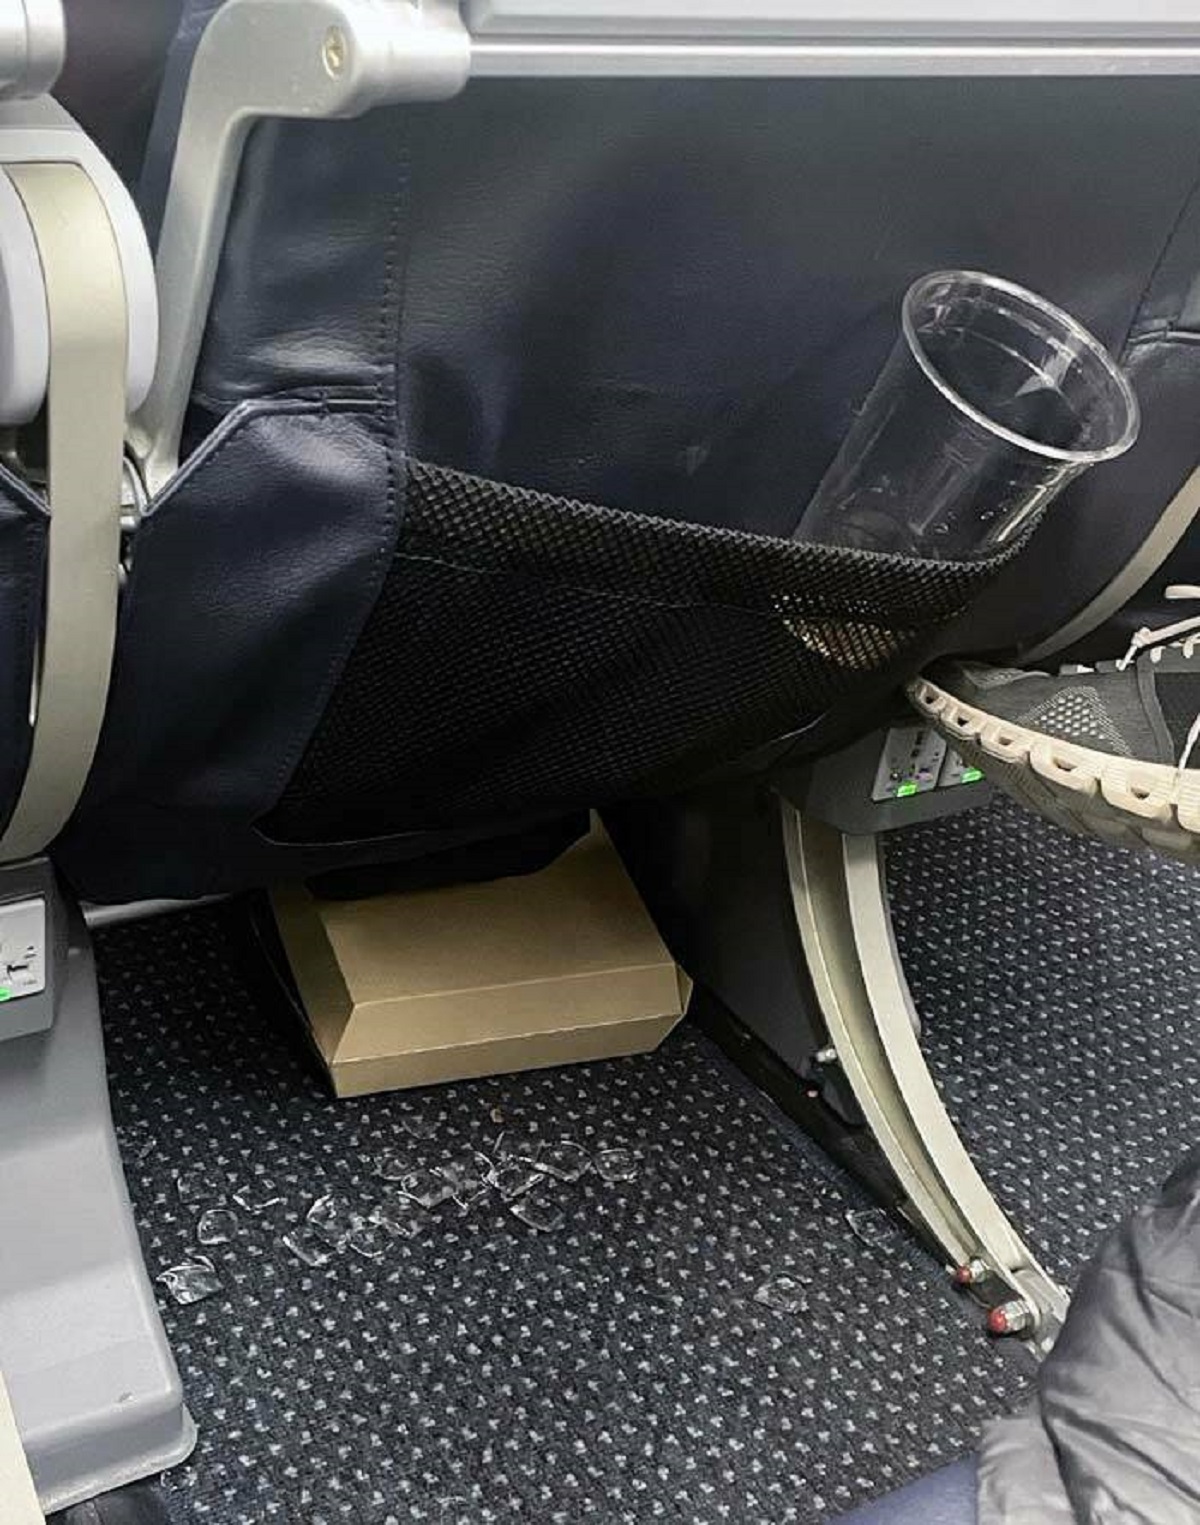 "The Lady Next To Me On The Plane Spilled Her Whole Drink, Got Up, And Moved Over One Seat. She Just Left All The Ice On The Floor And Kicked Her Empty Food Carton Under"